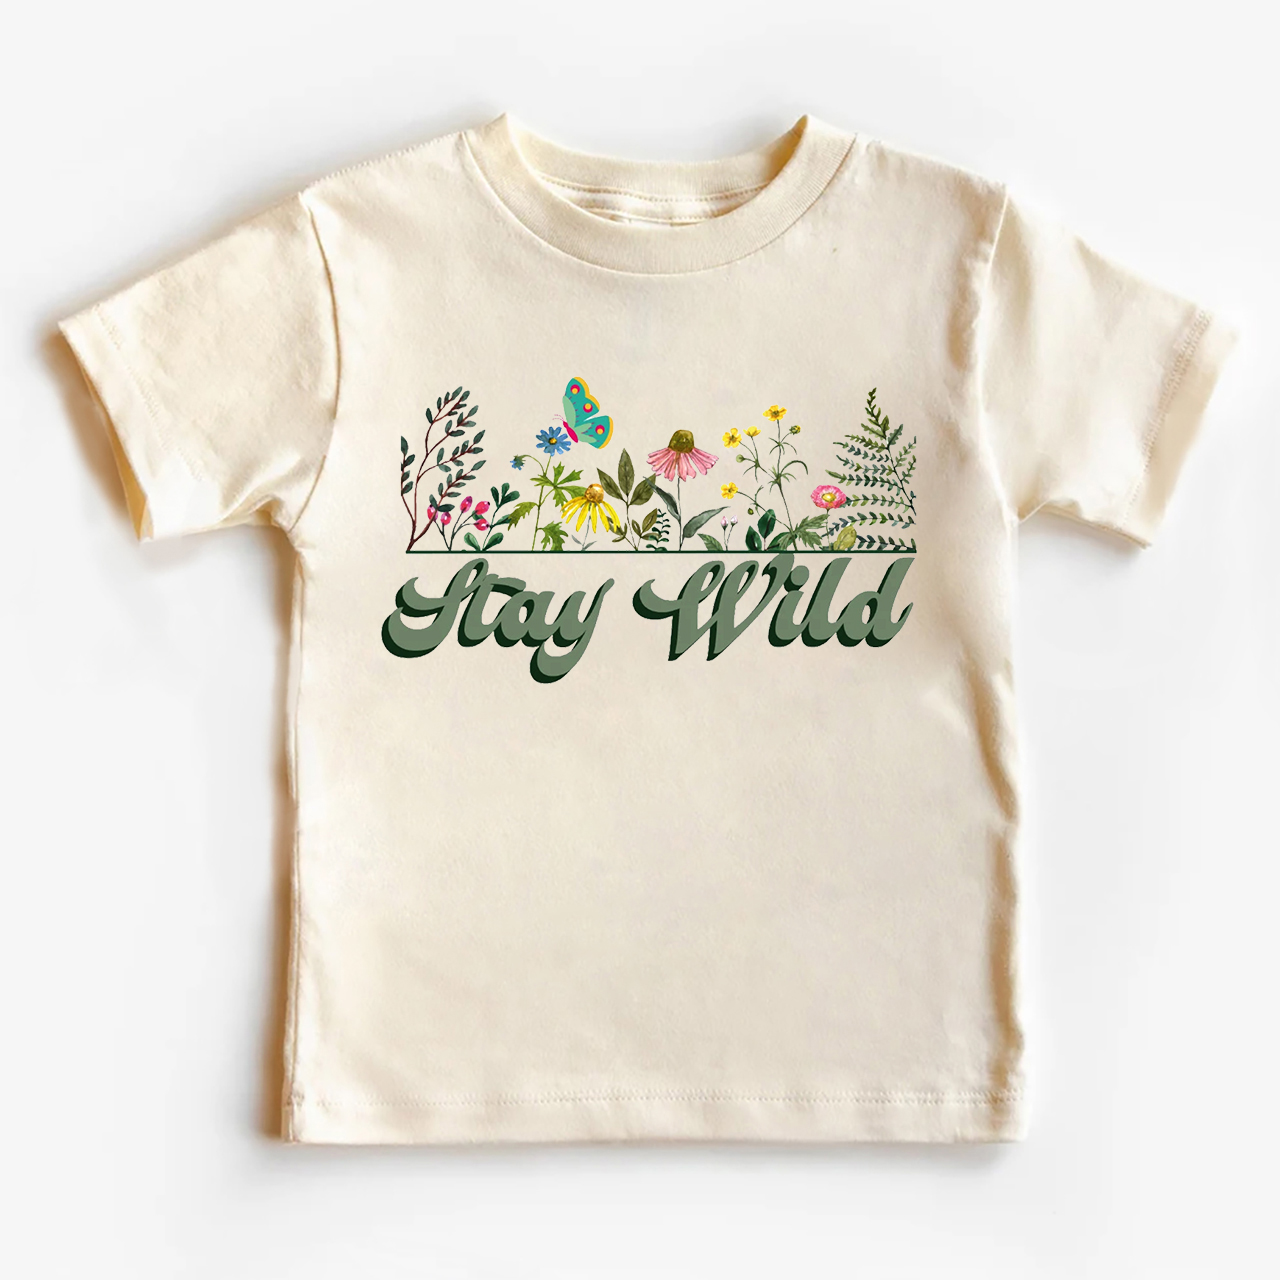 Stay Wild Nature Toddler Shirt